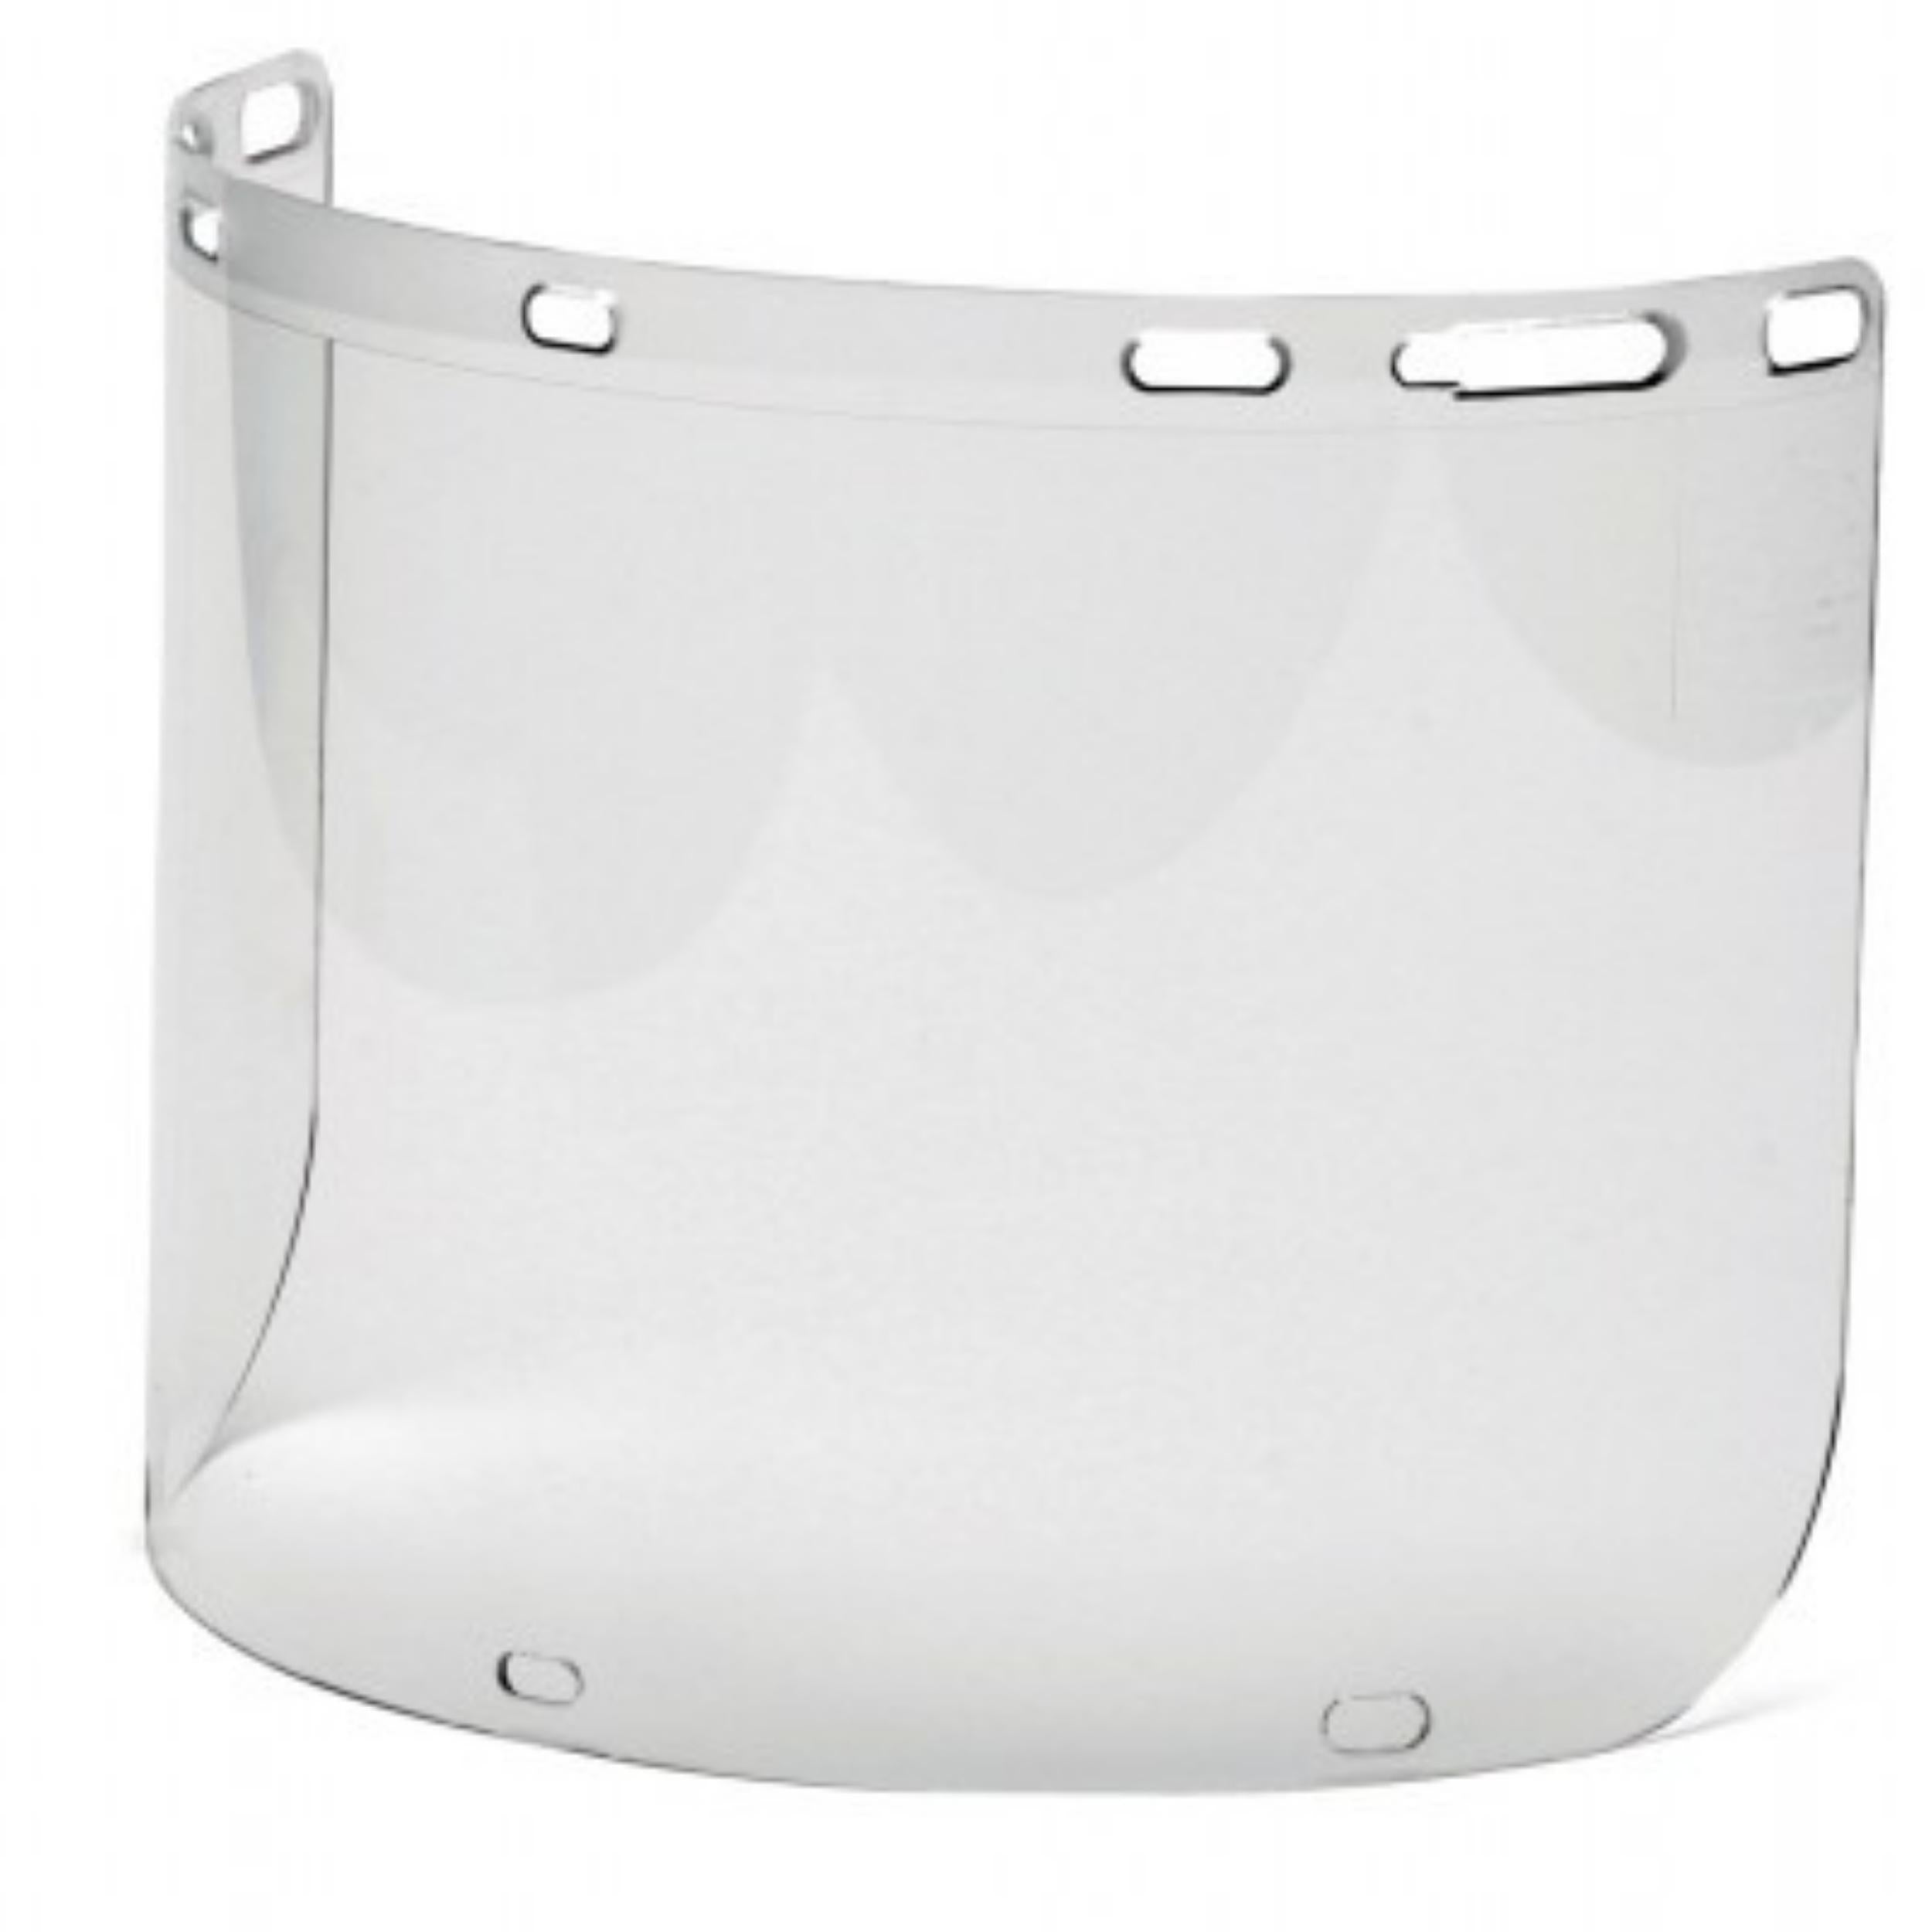 PYRAMEX-S1210CC- Cylinder Polycarbonate Face Shield with slots for chin cup